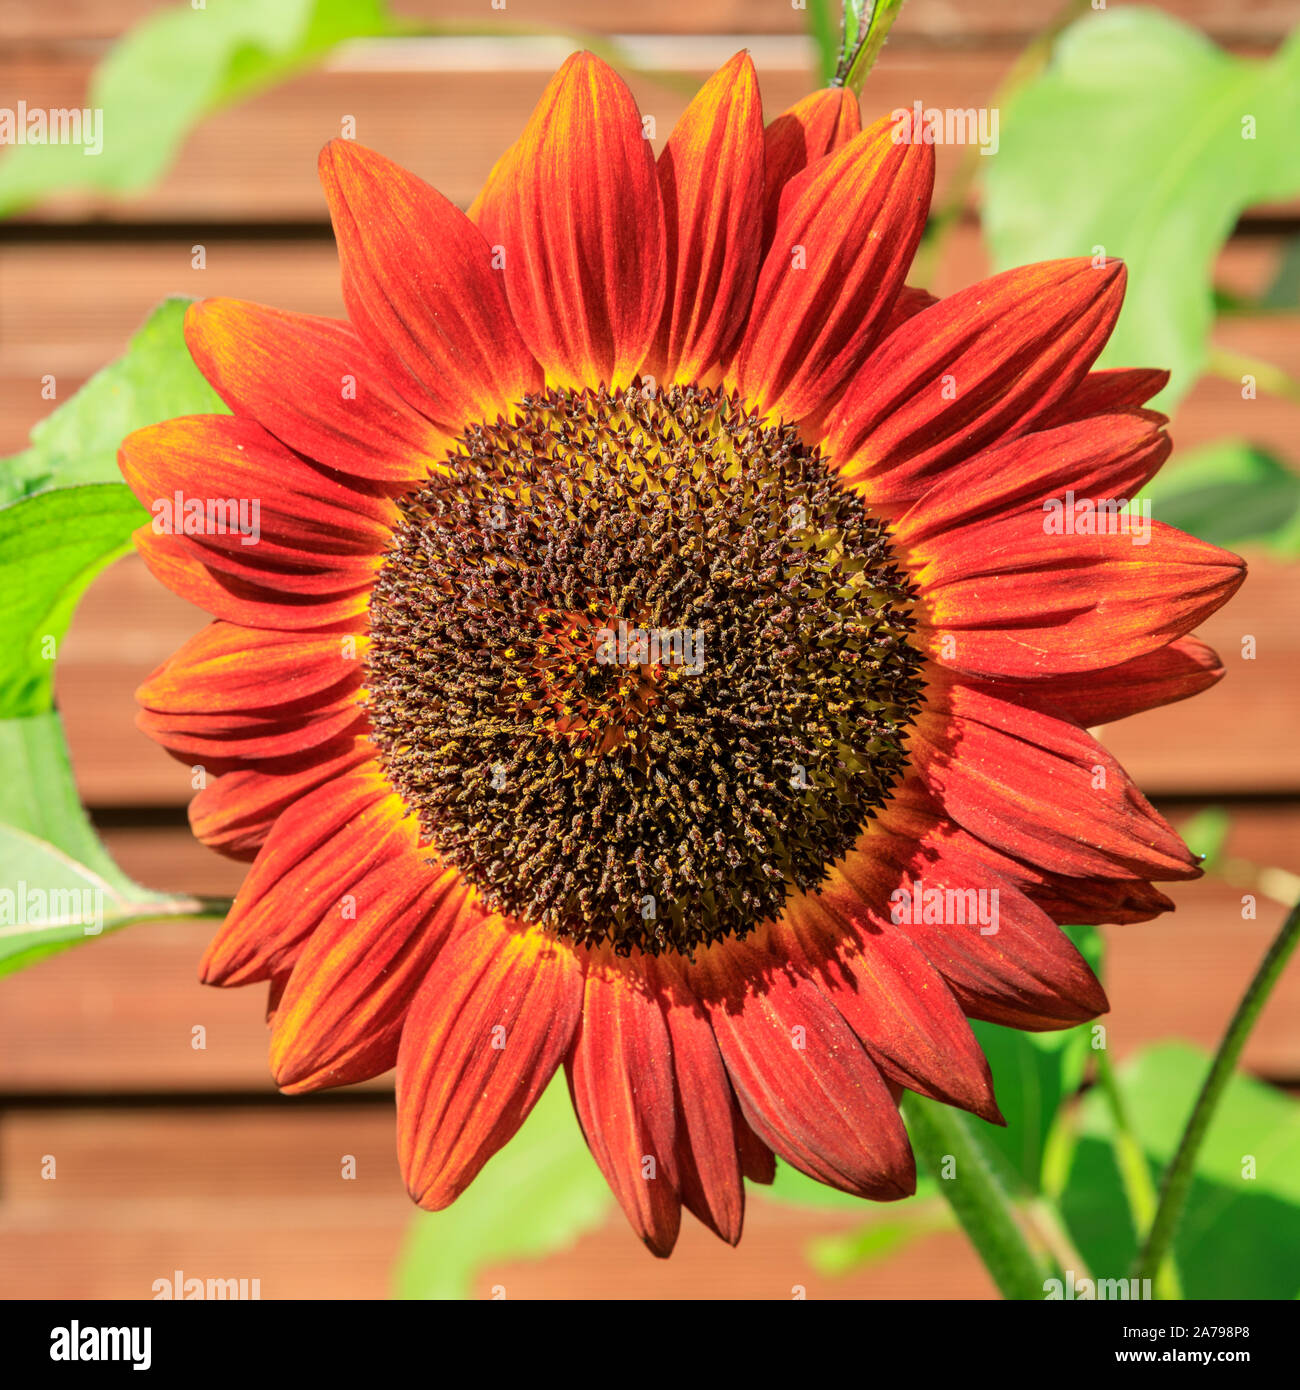 Square format close up of orange common sun flower (helianthus anuus), blossoming in sunshine Stock Photo